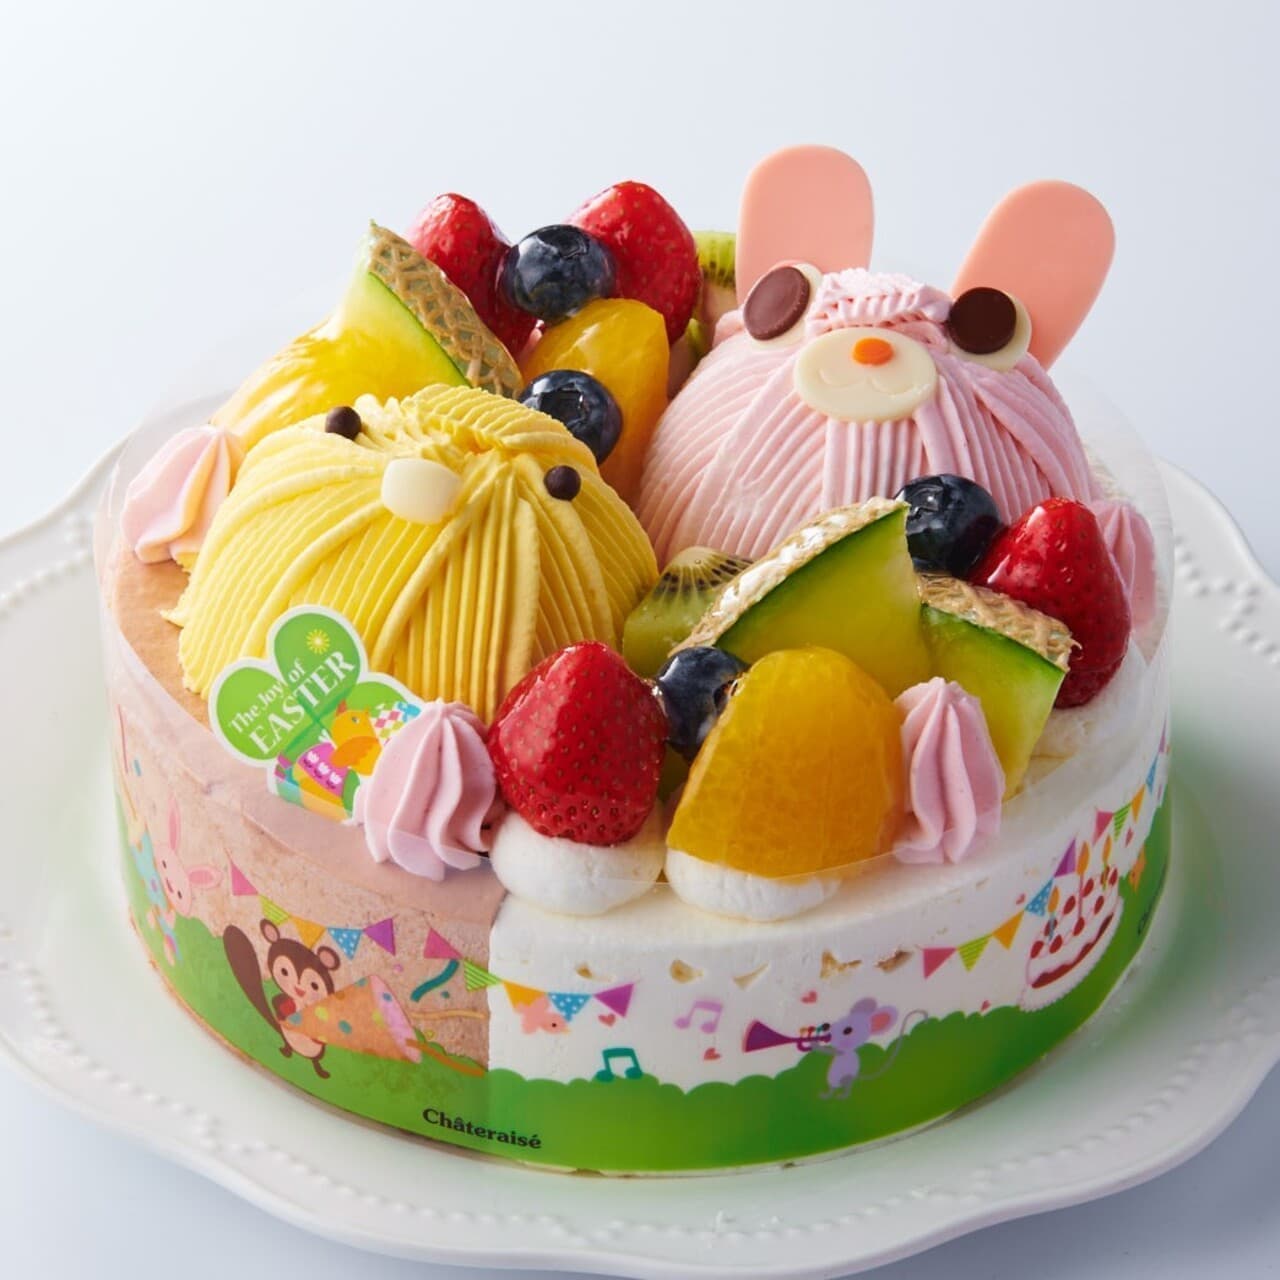 Chateraise "Joy of Easter Decoration with two flavors".